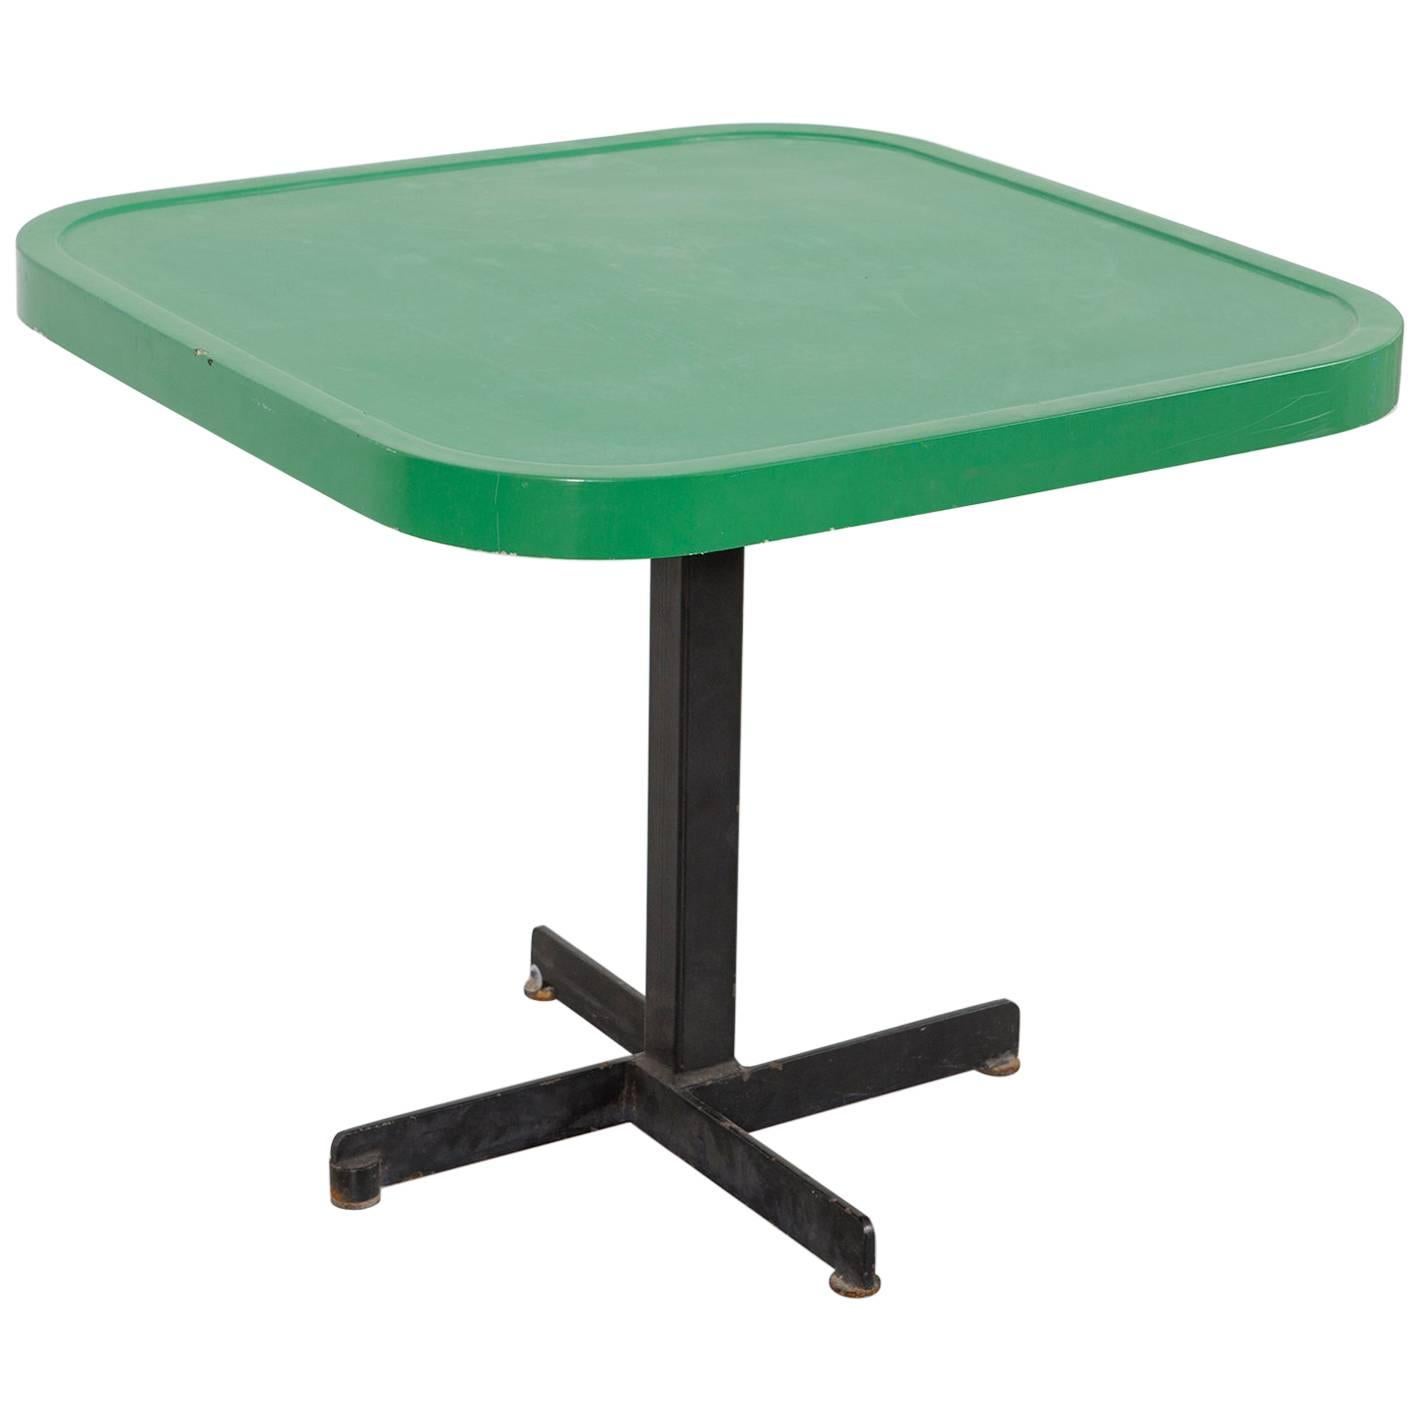 Les Arcs Enameled Metal Green Table by Charlotte Perriand For Sale